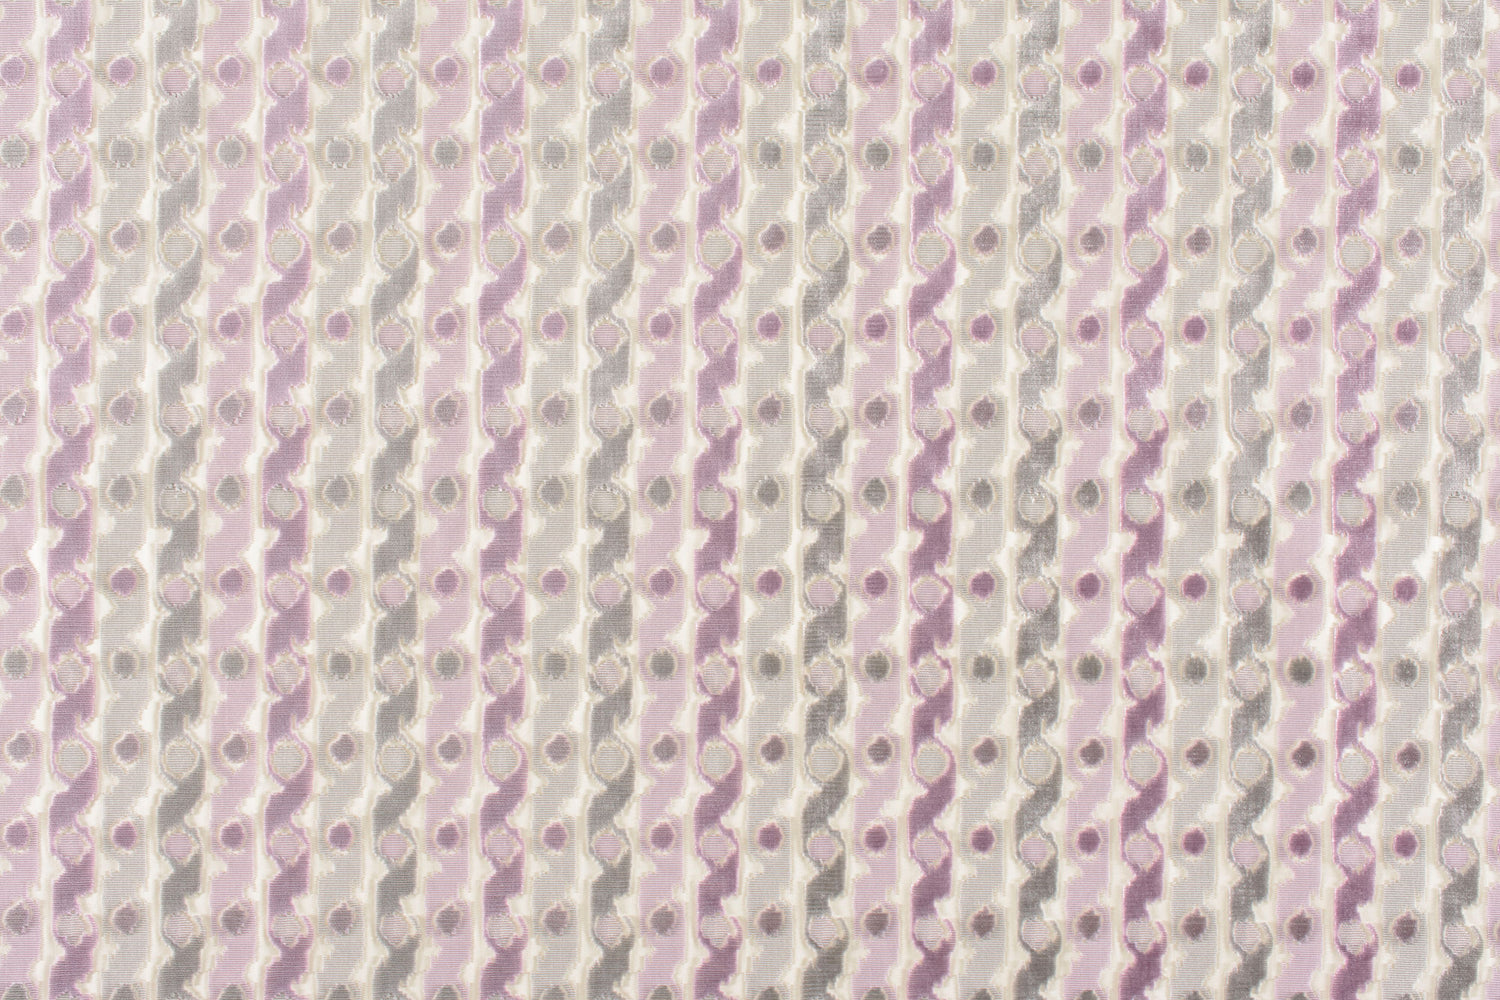 Velours Bergerac fabric in lavande color - pattern number JM 0003JVEL - by Scalamandre in the Old World Weavers collection